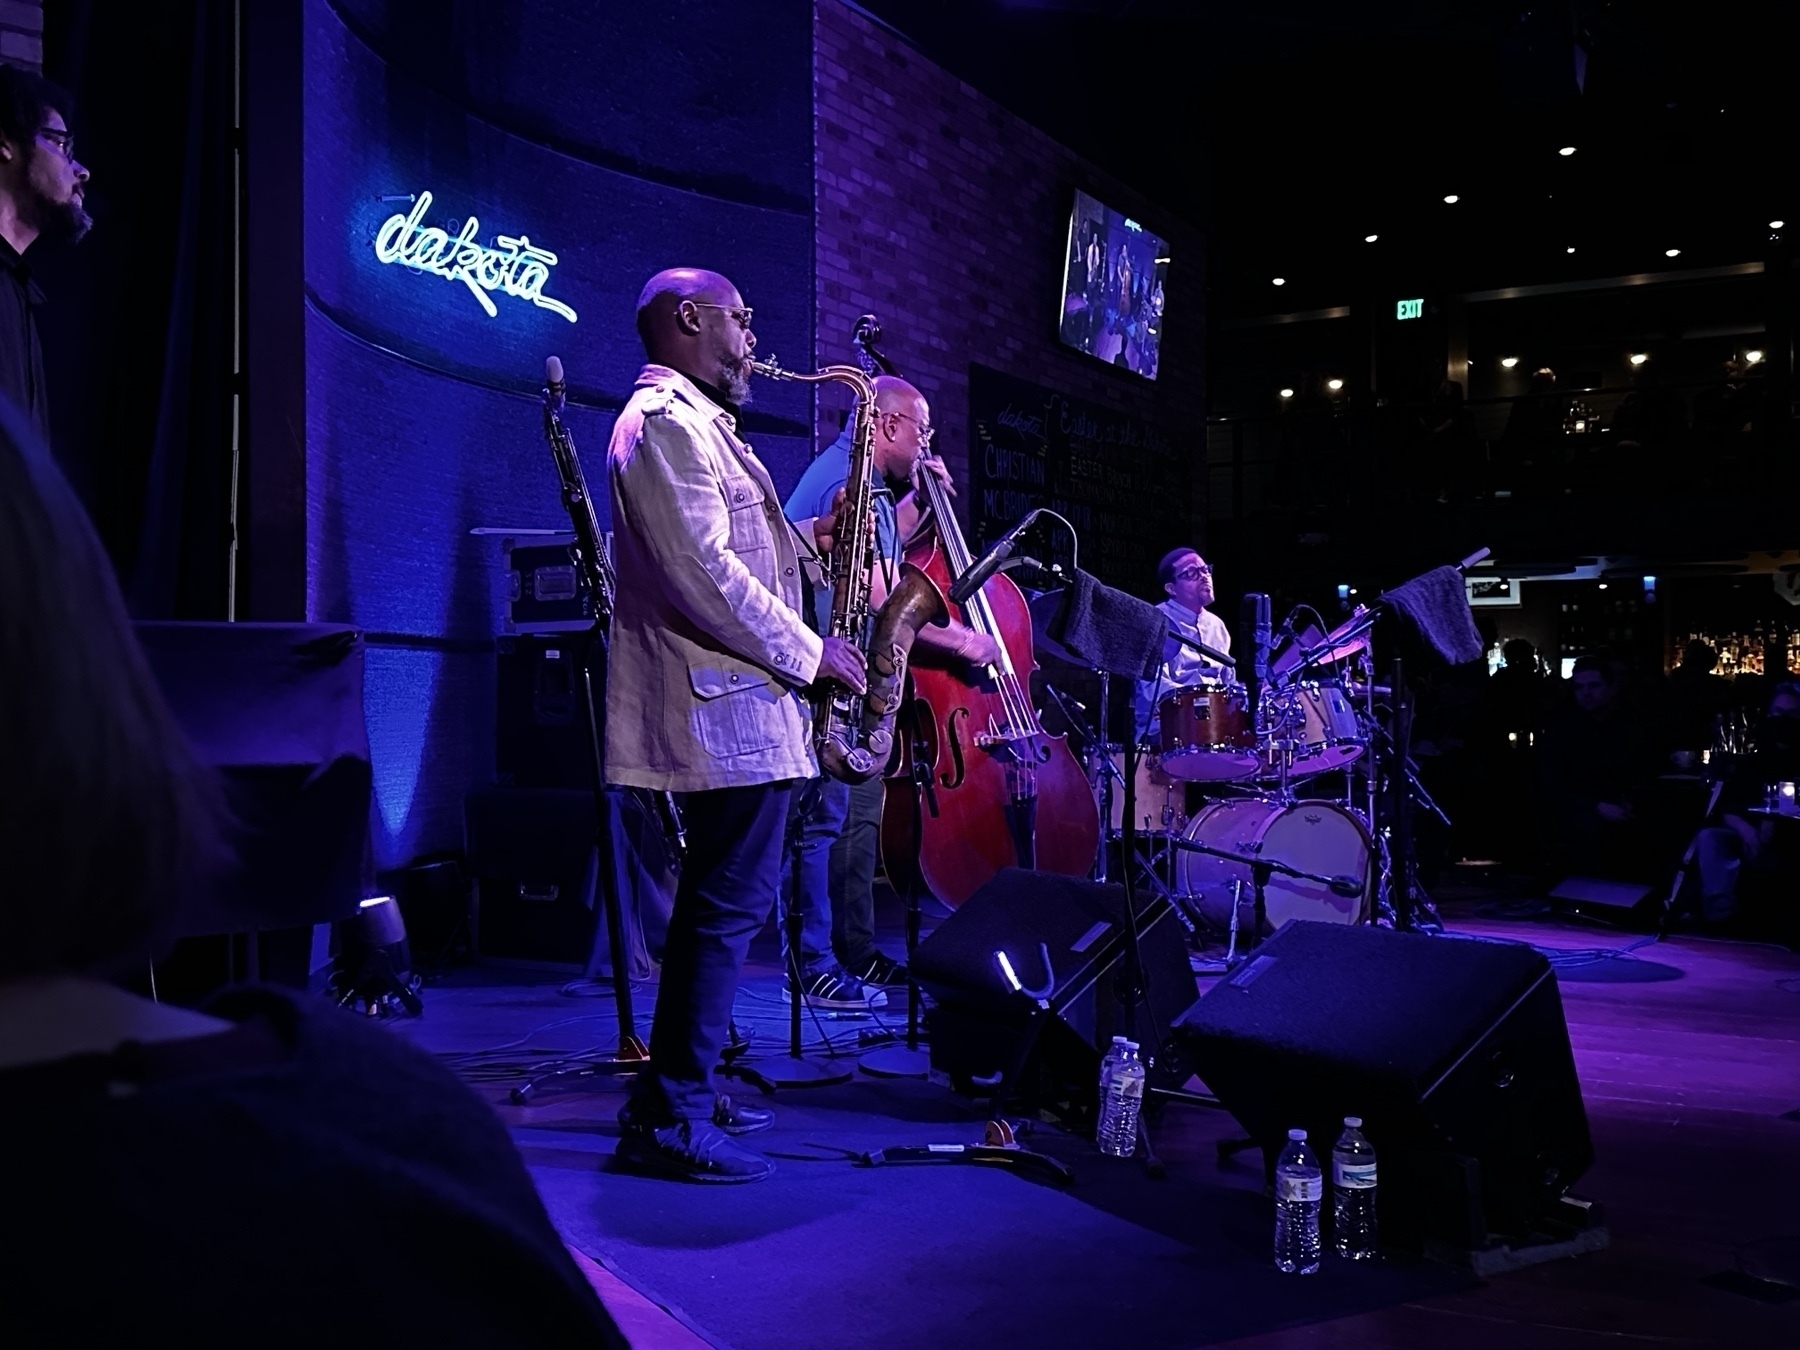 Christian McBride and New Jawn